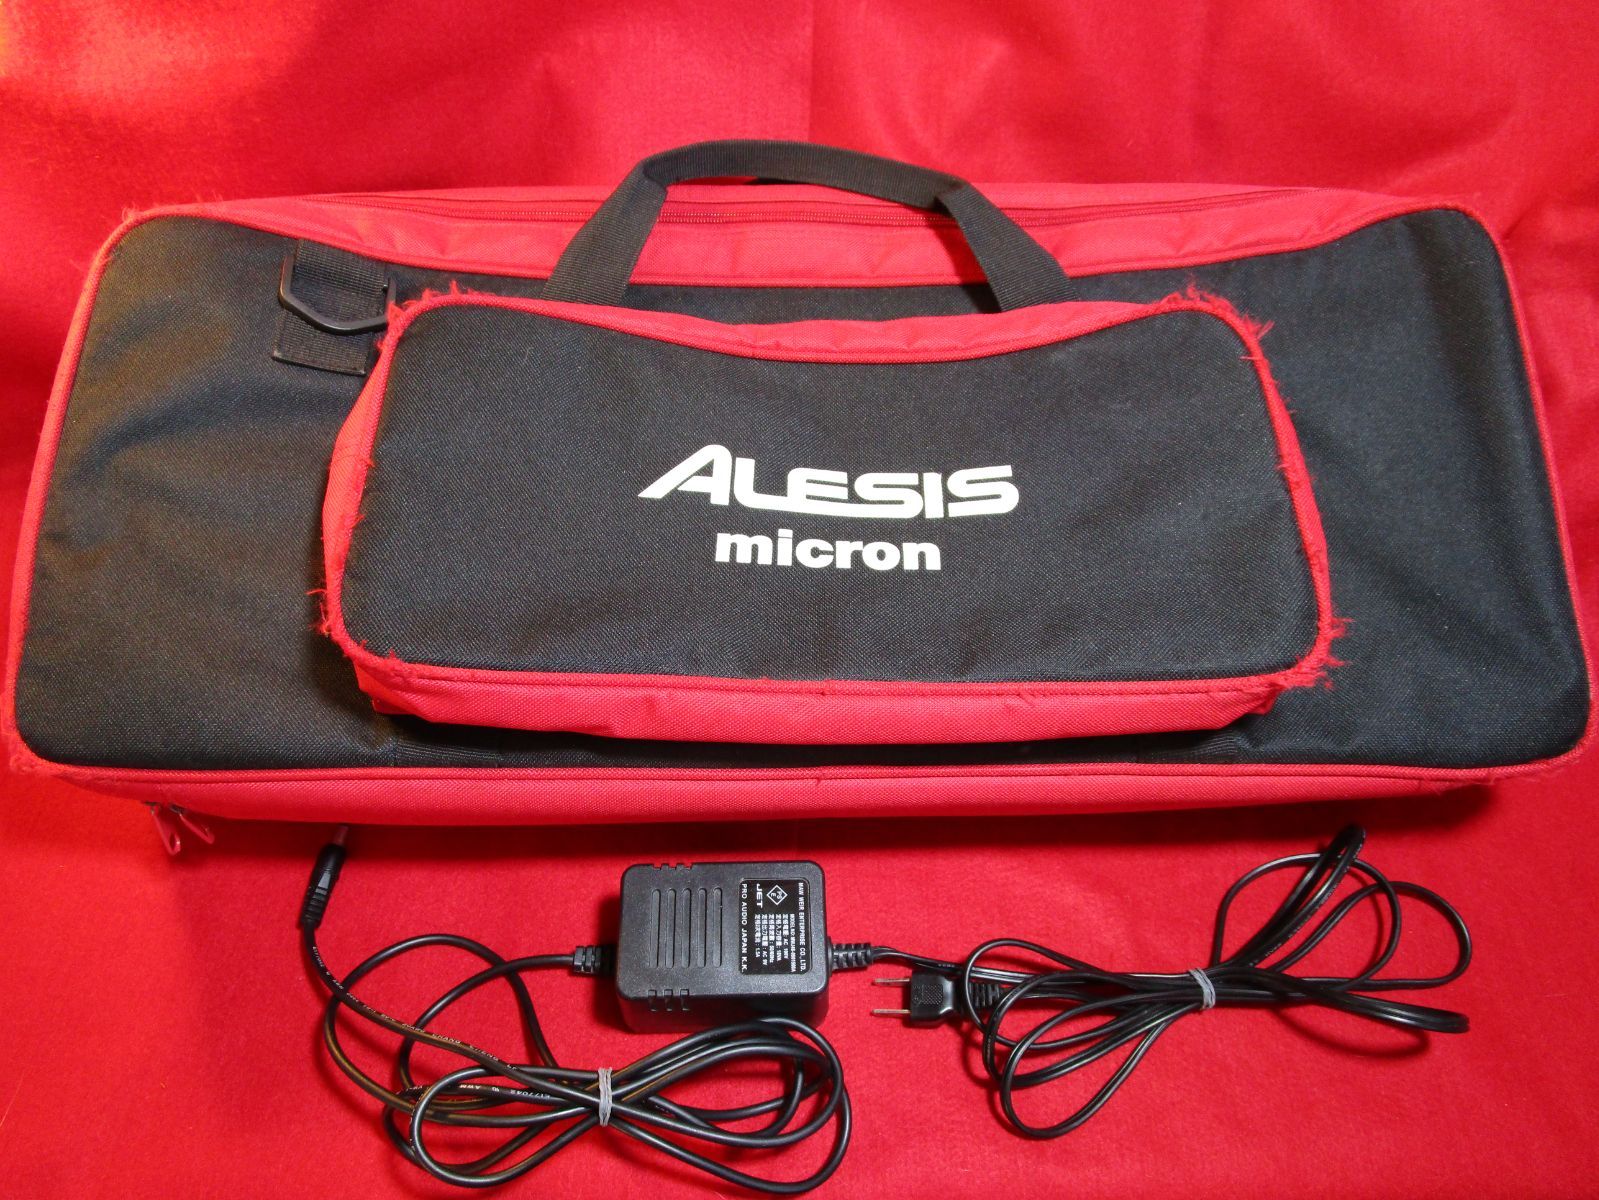 ALESIS micron   アレシス マイクロン　専用バッグ付き